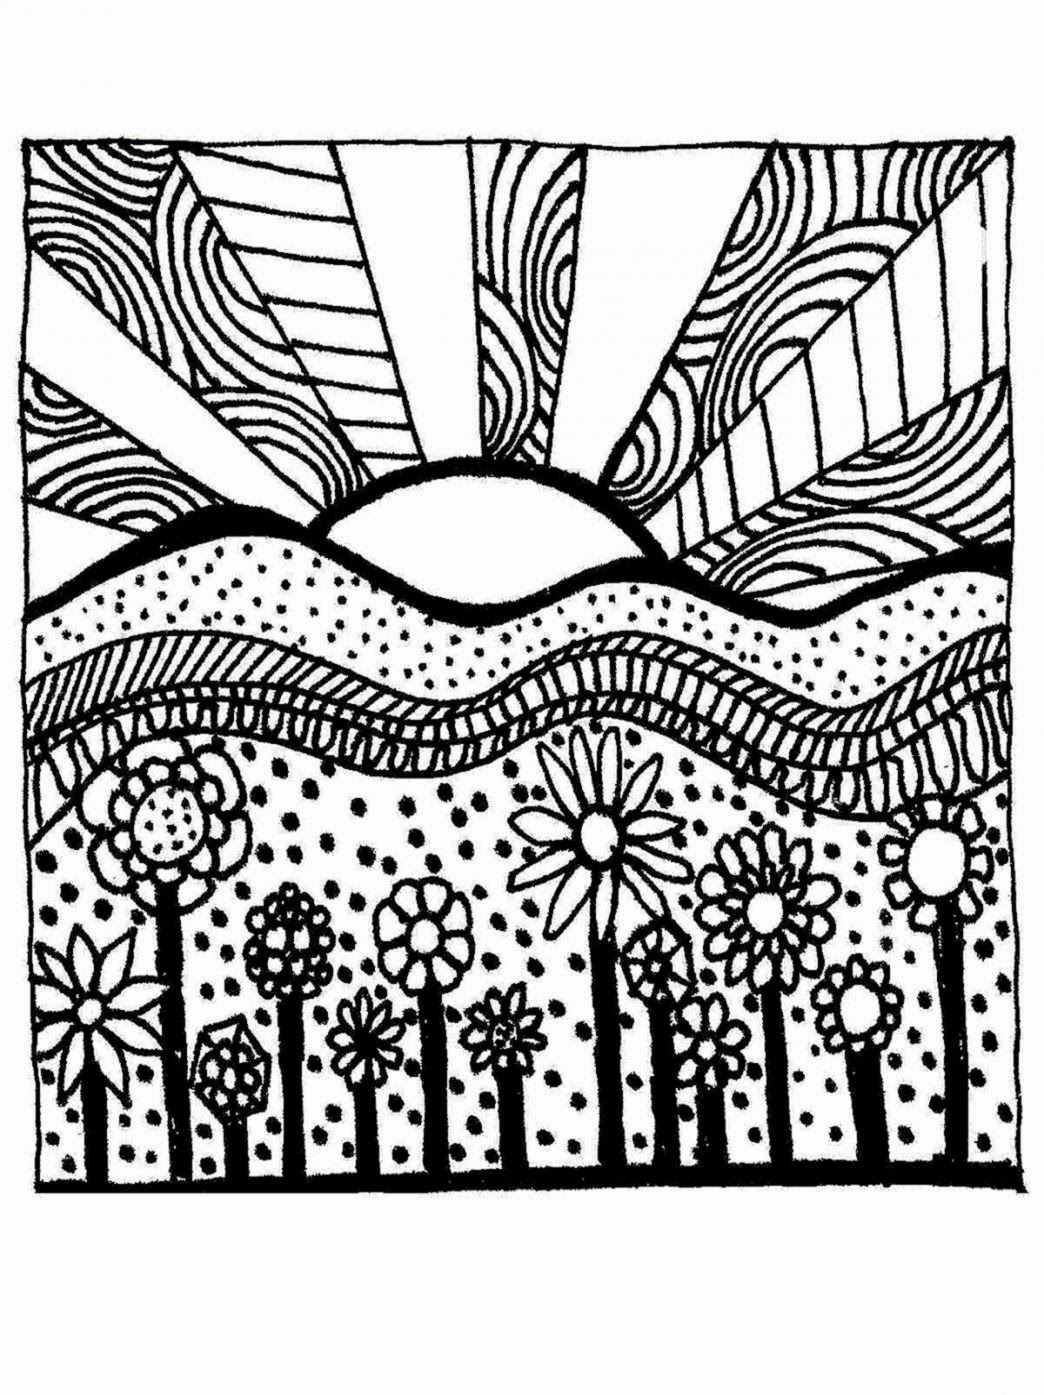 Printable Coloring Pages For Adults Free Coloring Sheet BEDECOR Free Coloring Picture wallpaper give a chance to color on the wall without getting in trouble! Fill the walls of your home or office with stress-relieving [bedroomdecorz.blogspot.com]